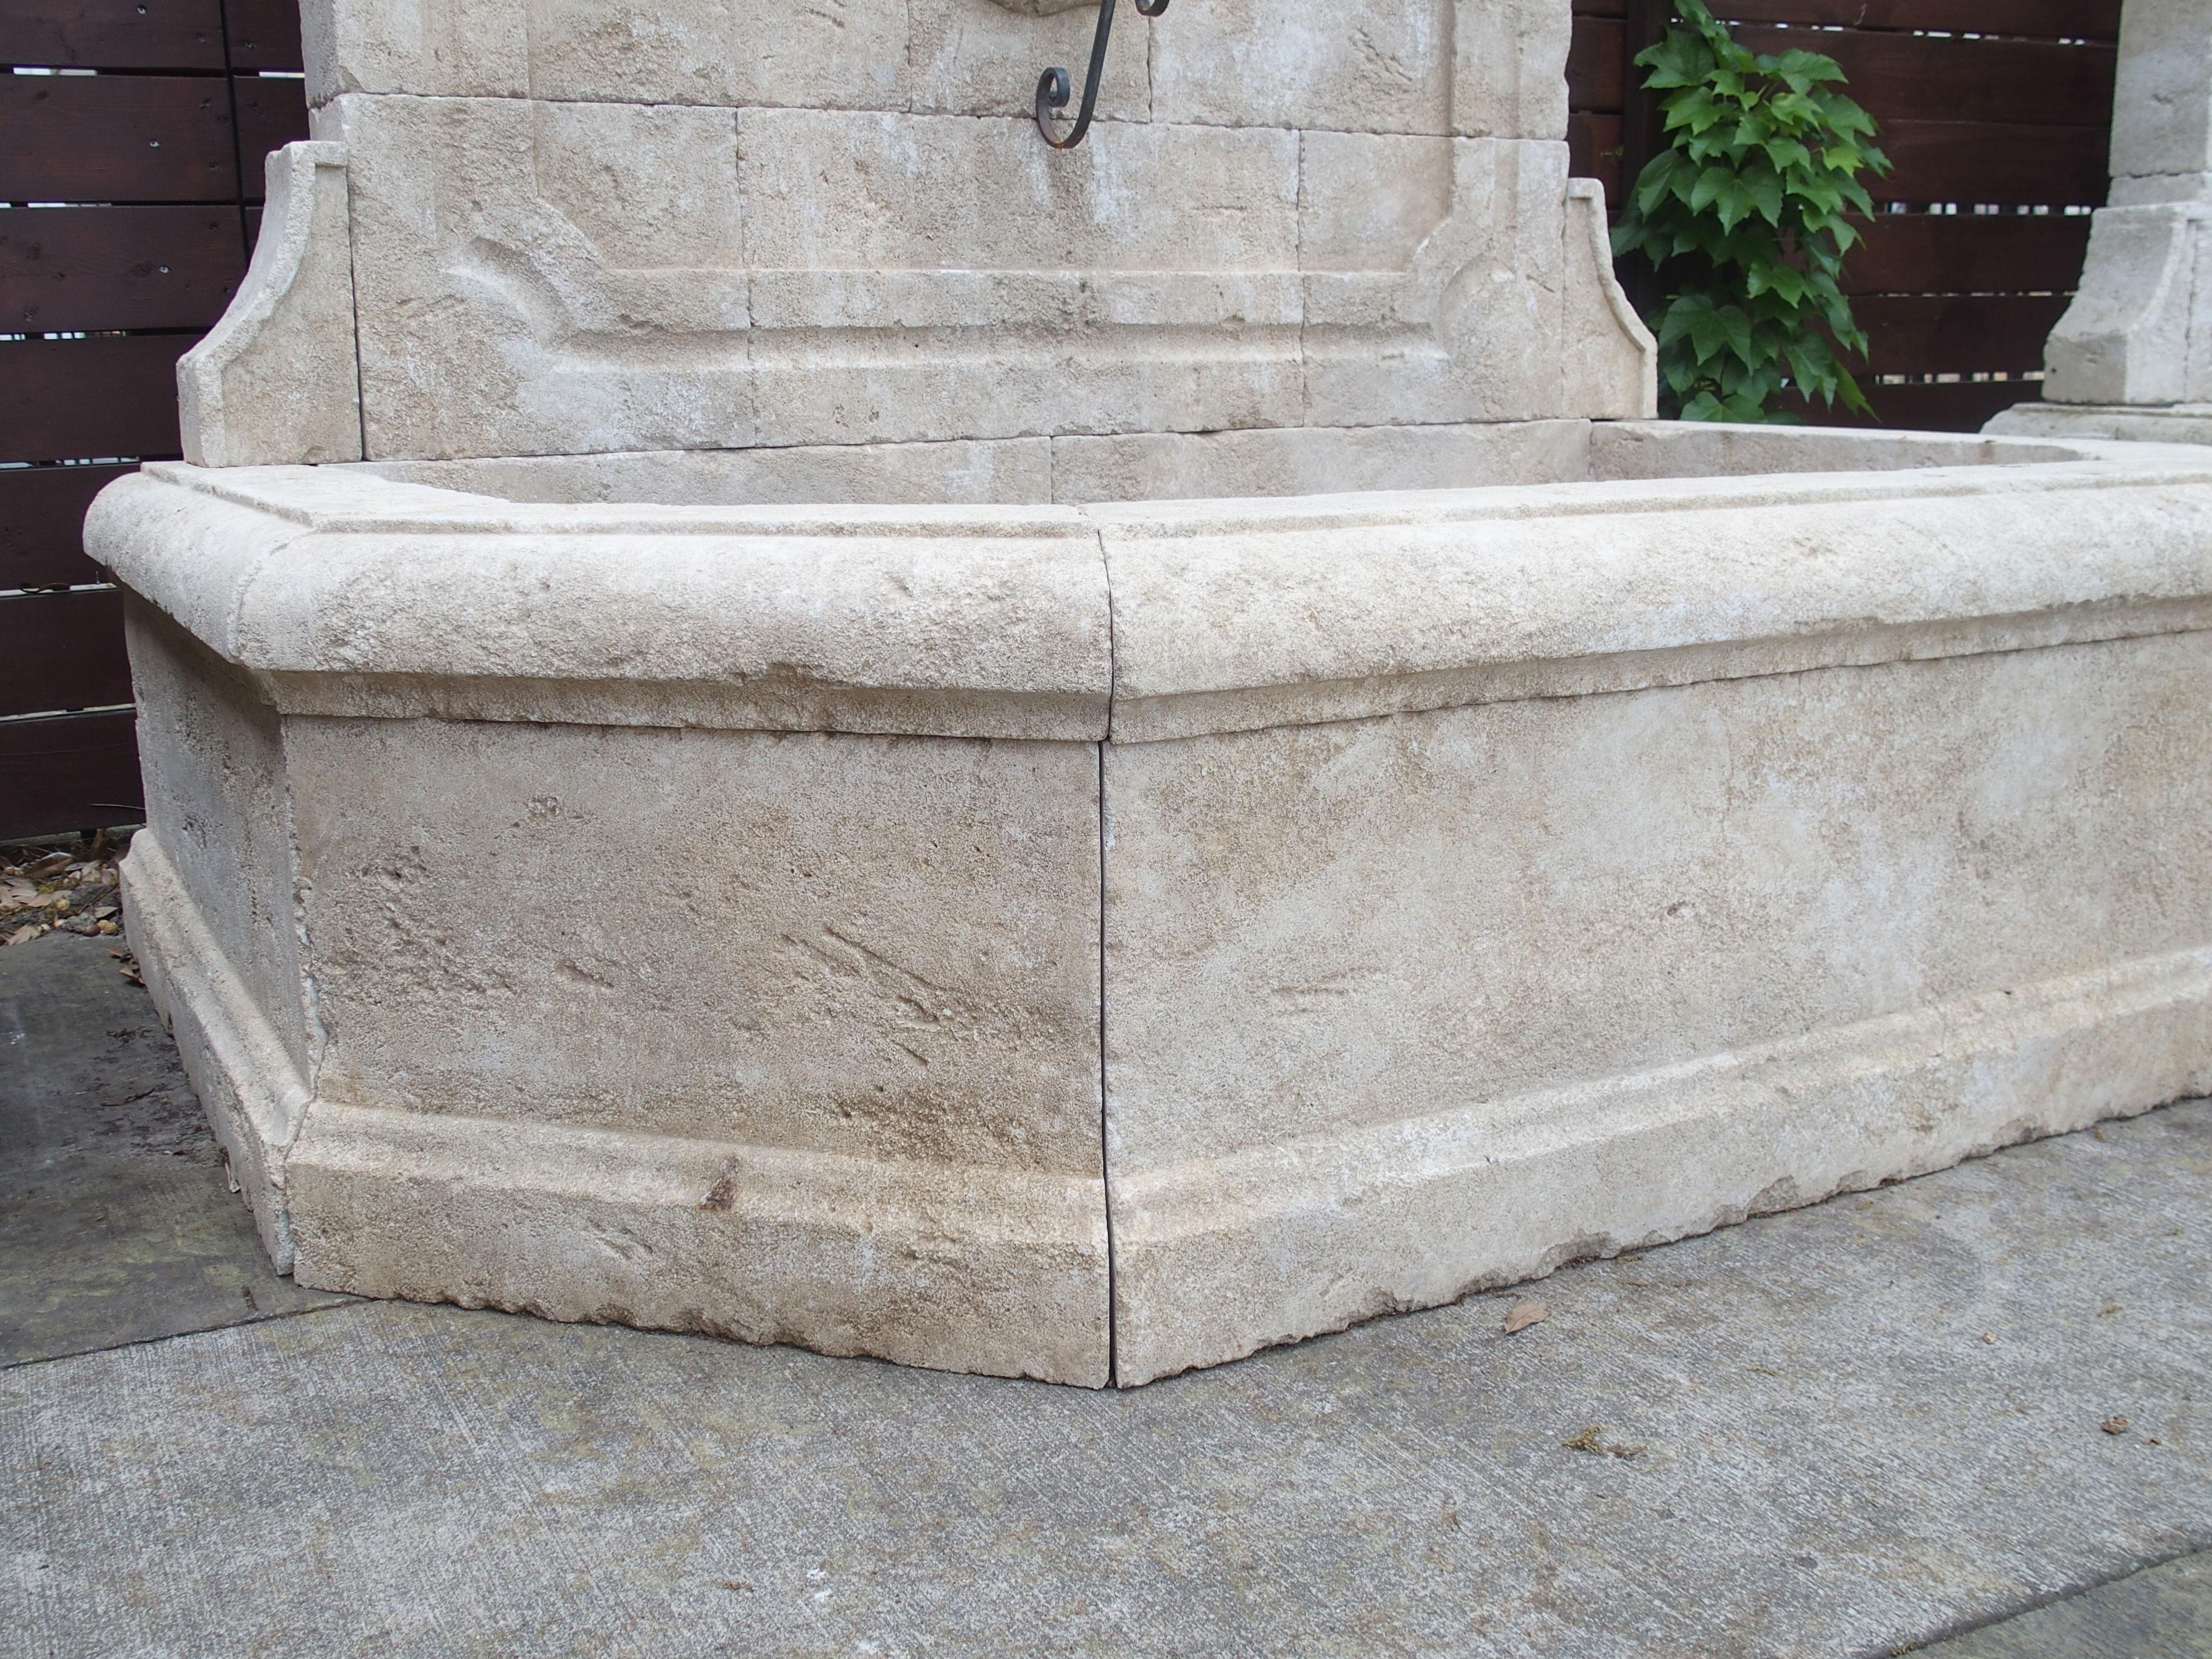 Hand-Carved Limestone Wall Fountain with Carved Stone Backplate from Provence, France